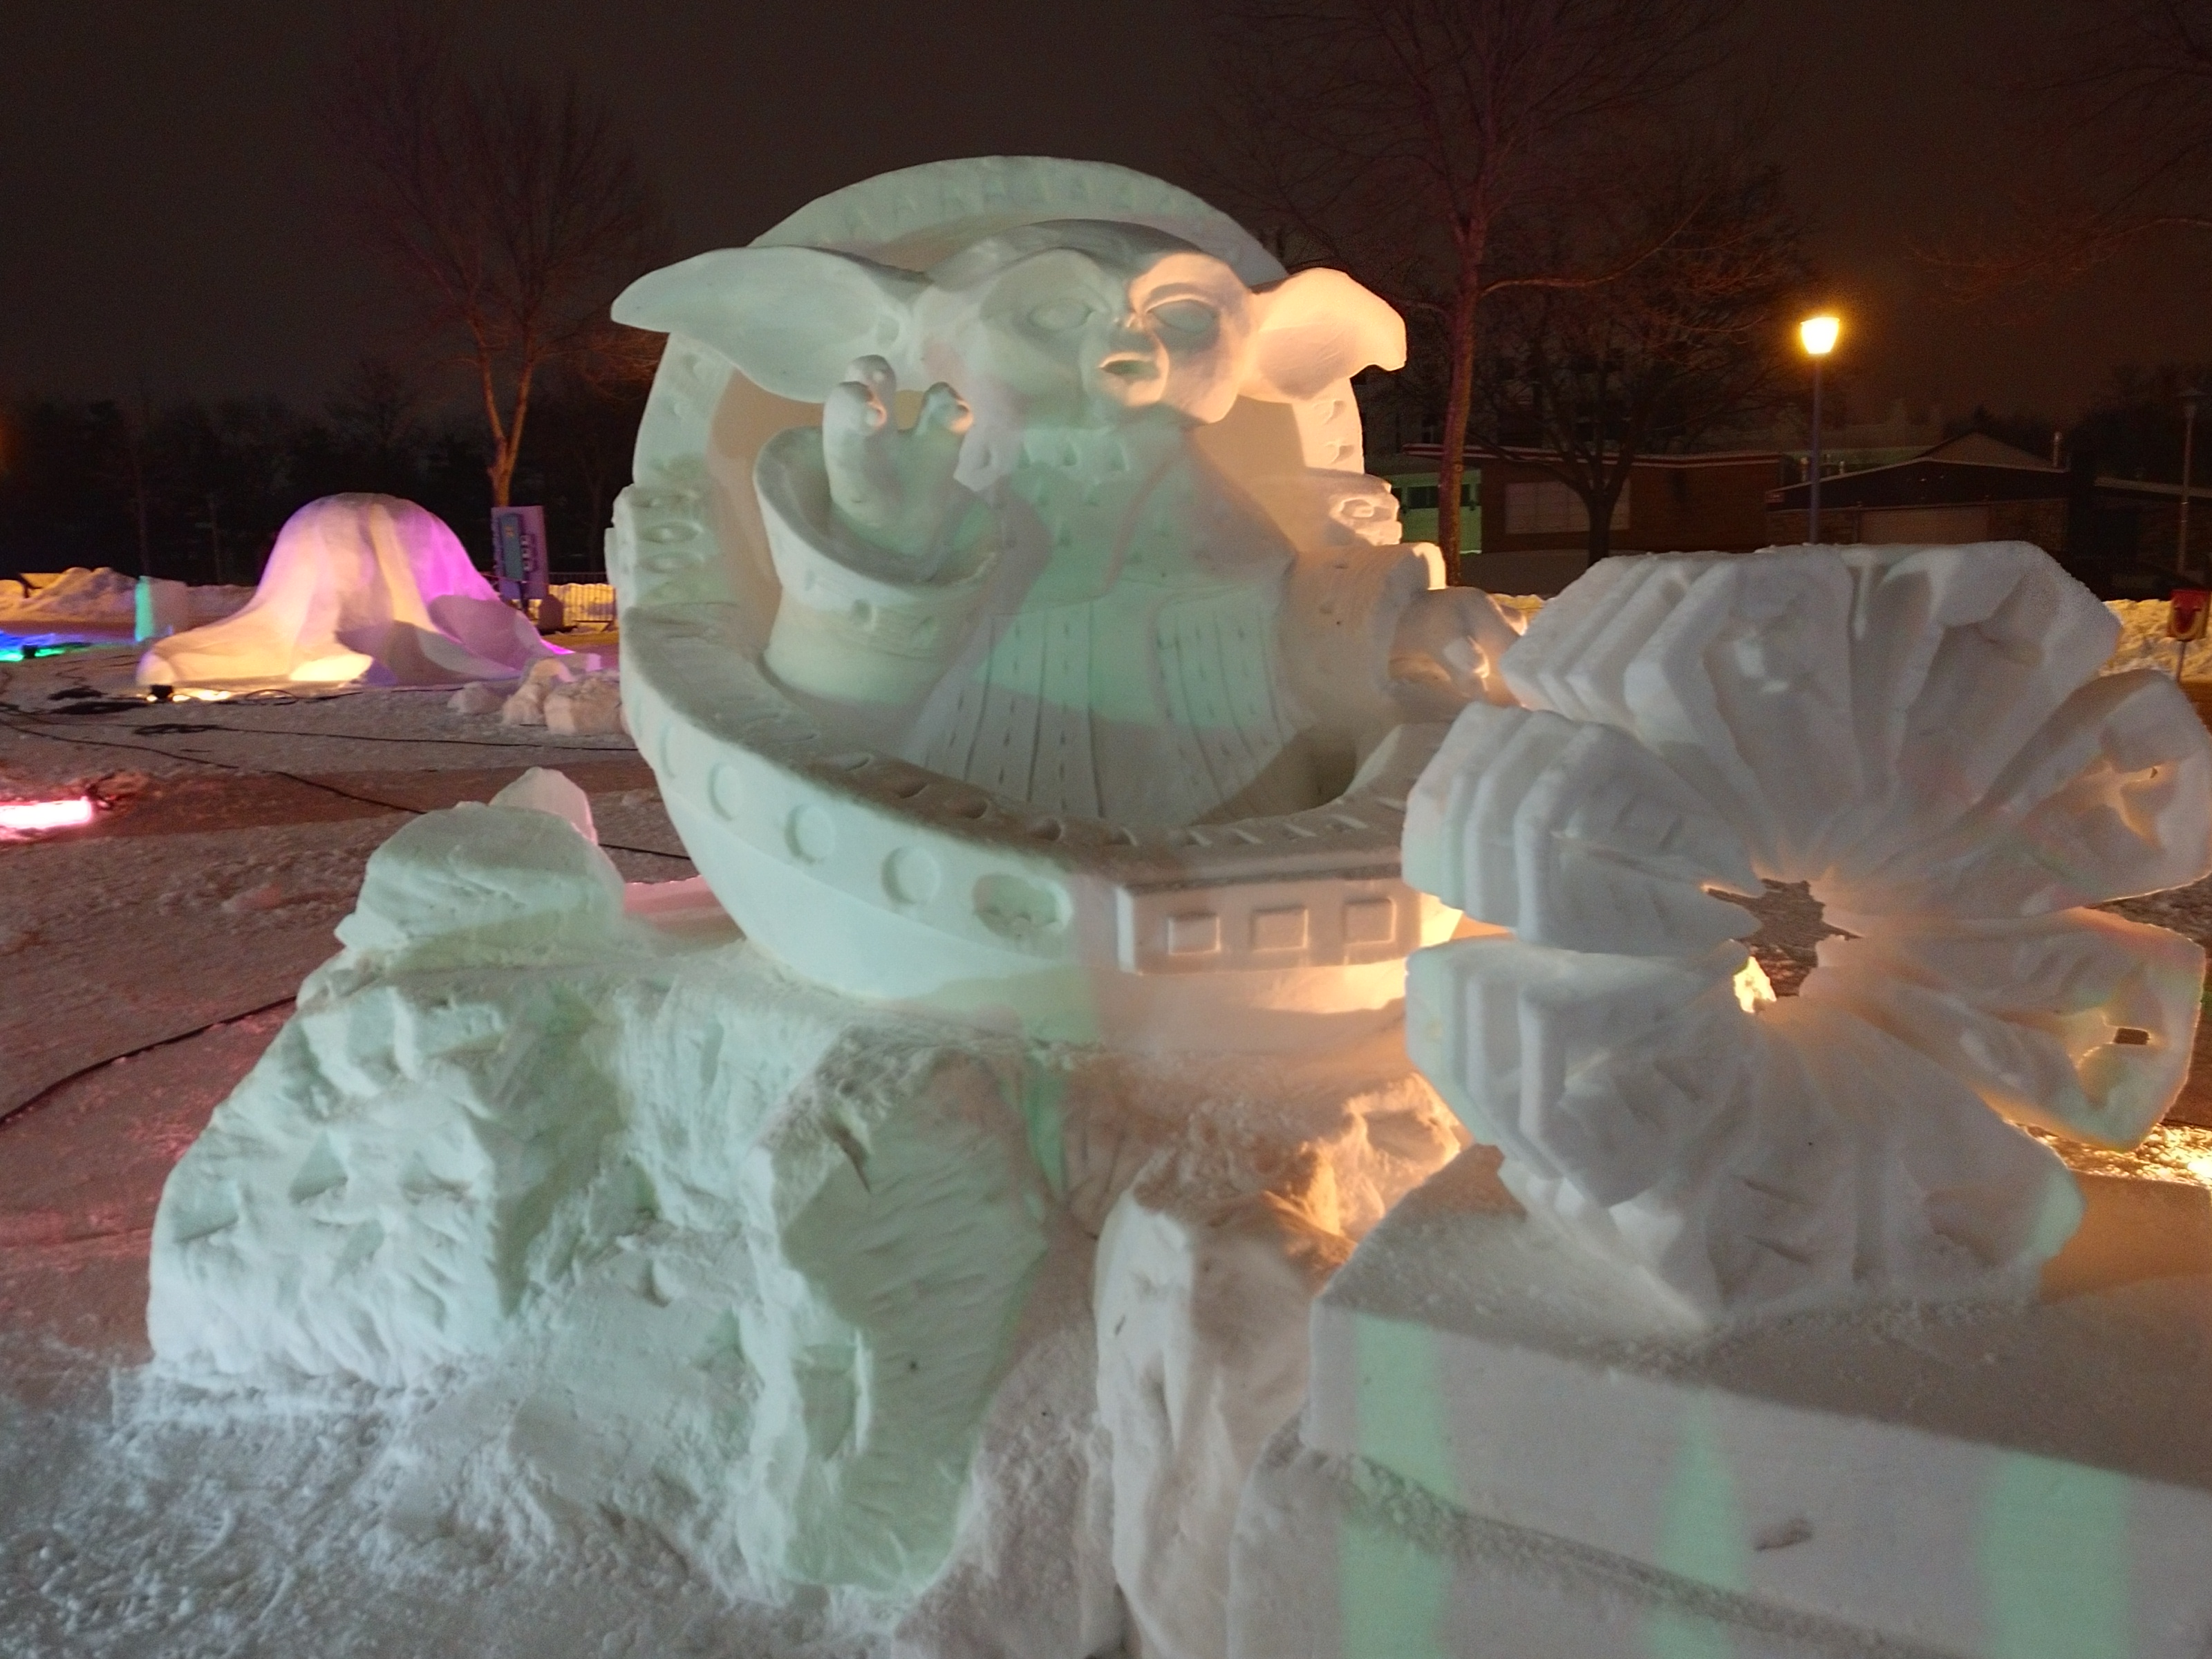 The Asset snow sculpture created by the Pig’s Eye Pirates team for the 2020 Saint Paul Winter Carnival in Saint Paul, Minn.